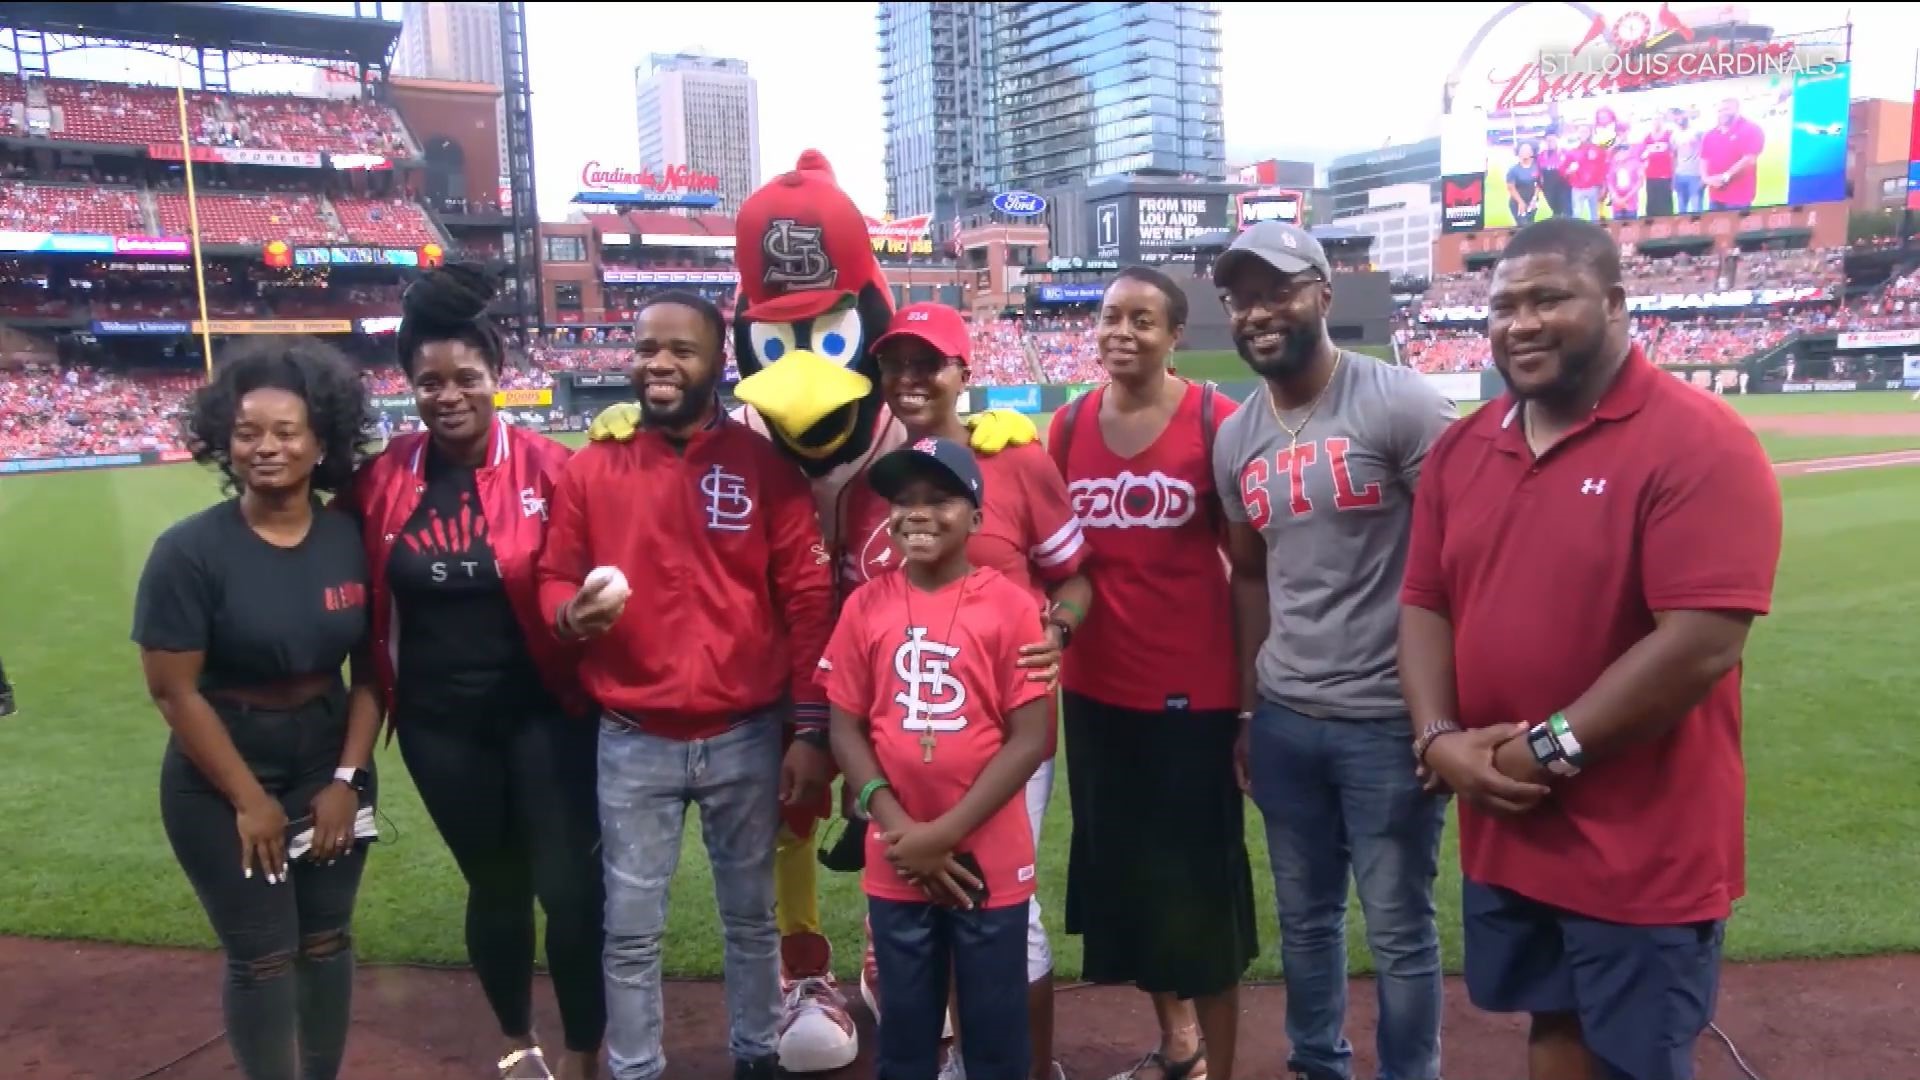 Bold Moves CEO Koran Bolden threw out the first pitch of Saturday's game and gave tickets to students, educators and people affected by gun violence